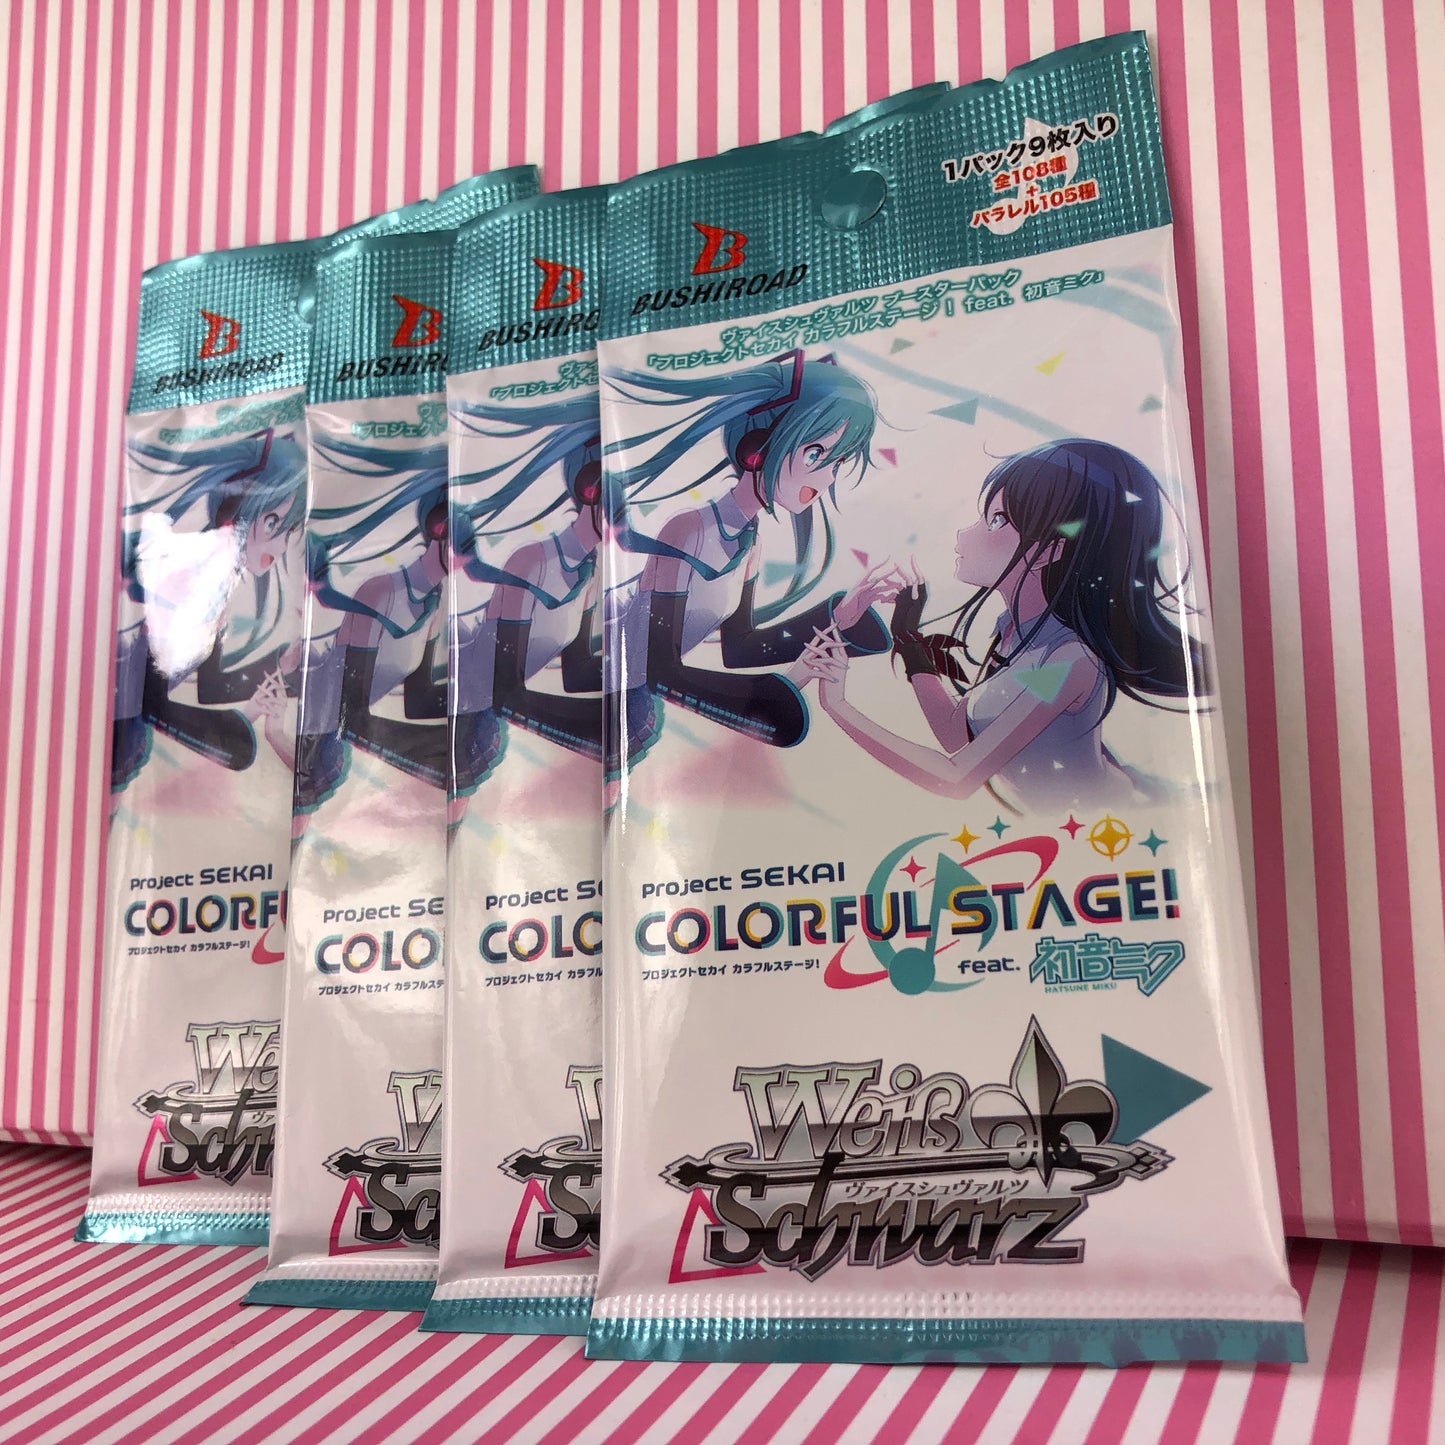 Booster Pack Paquete Expansión Weib Weiss Schwarz Project Sekai Colorful Stage! ft. Hatsune Miku (1 Unit)